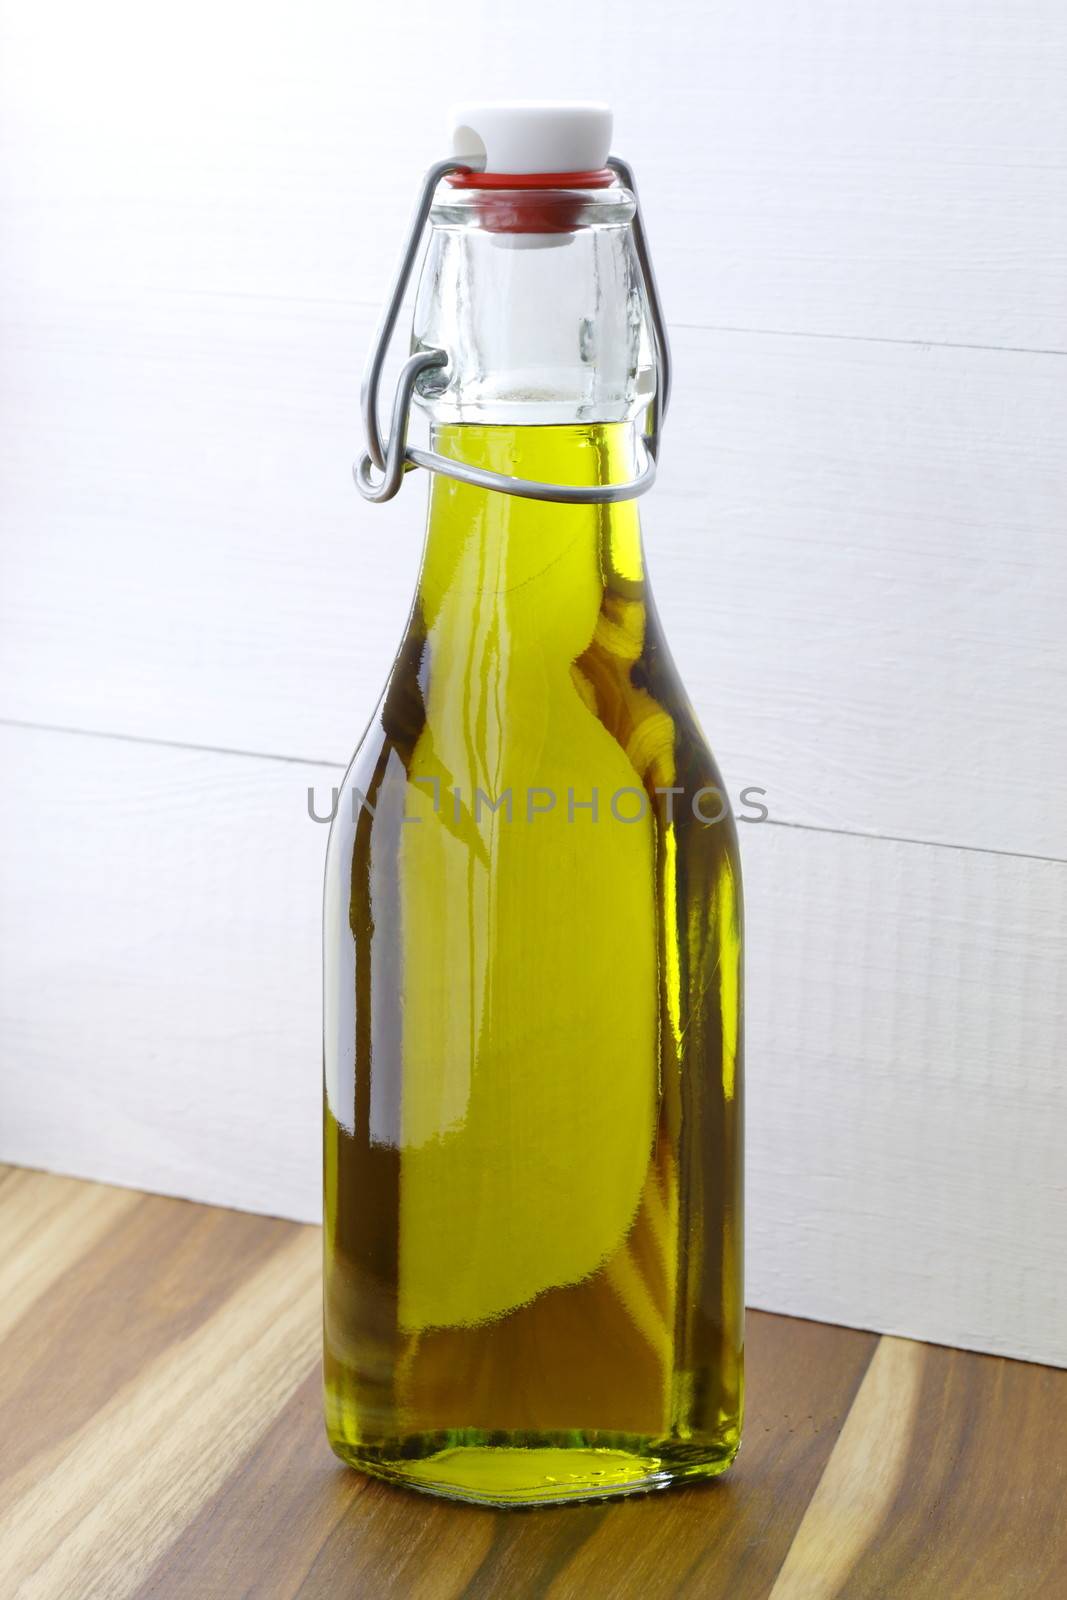 Extra virgin olive oil by tacar